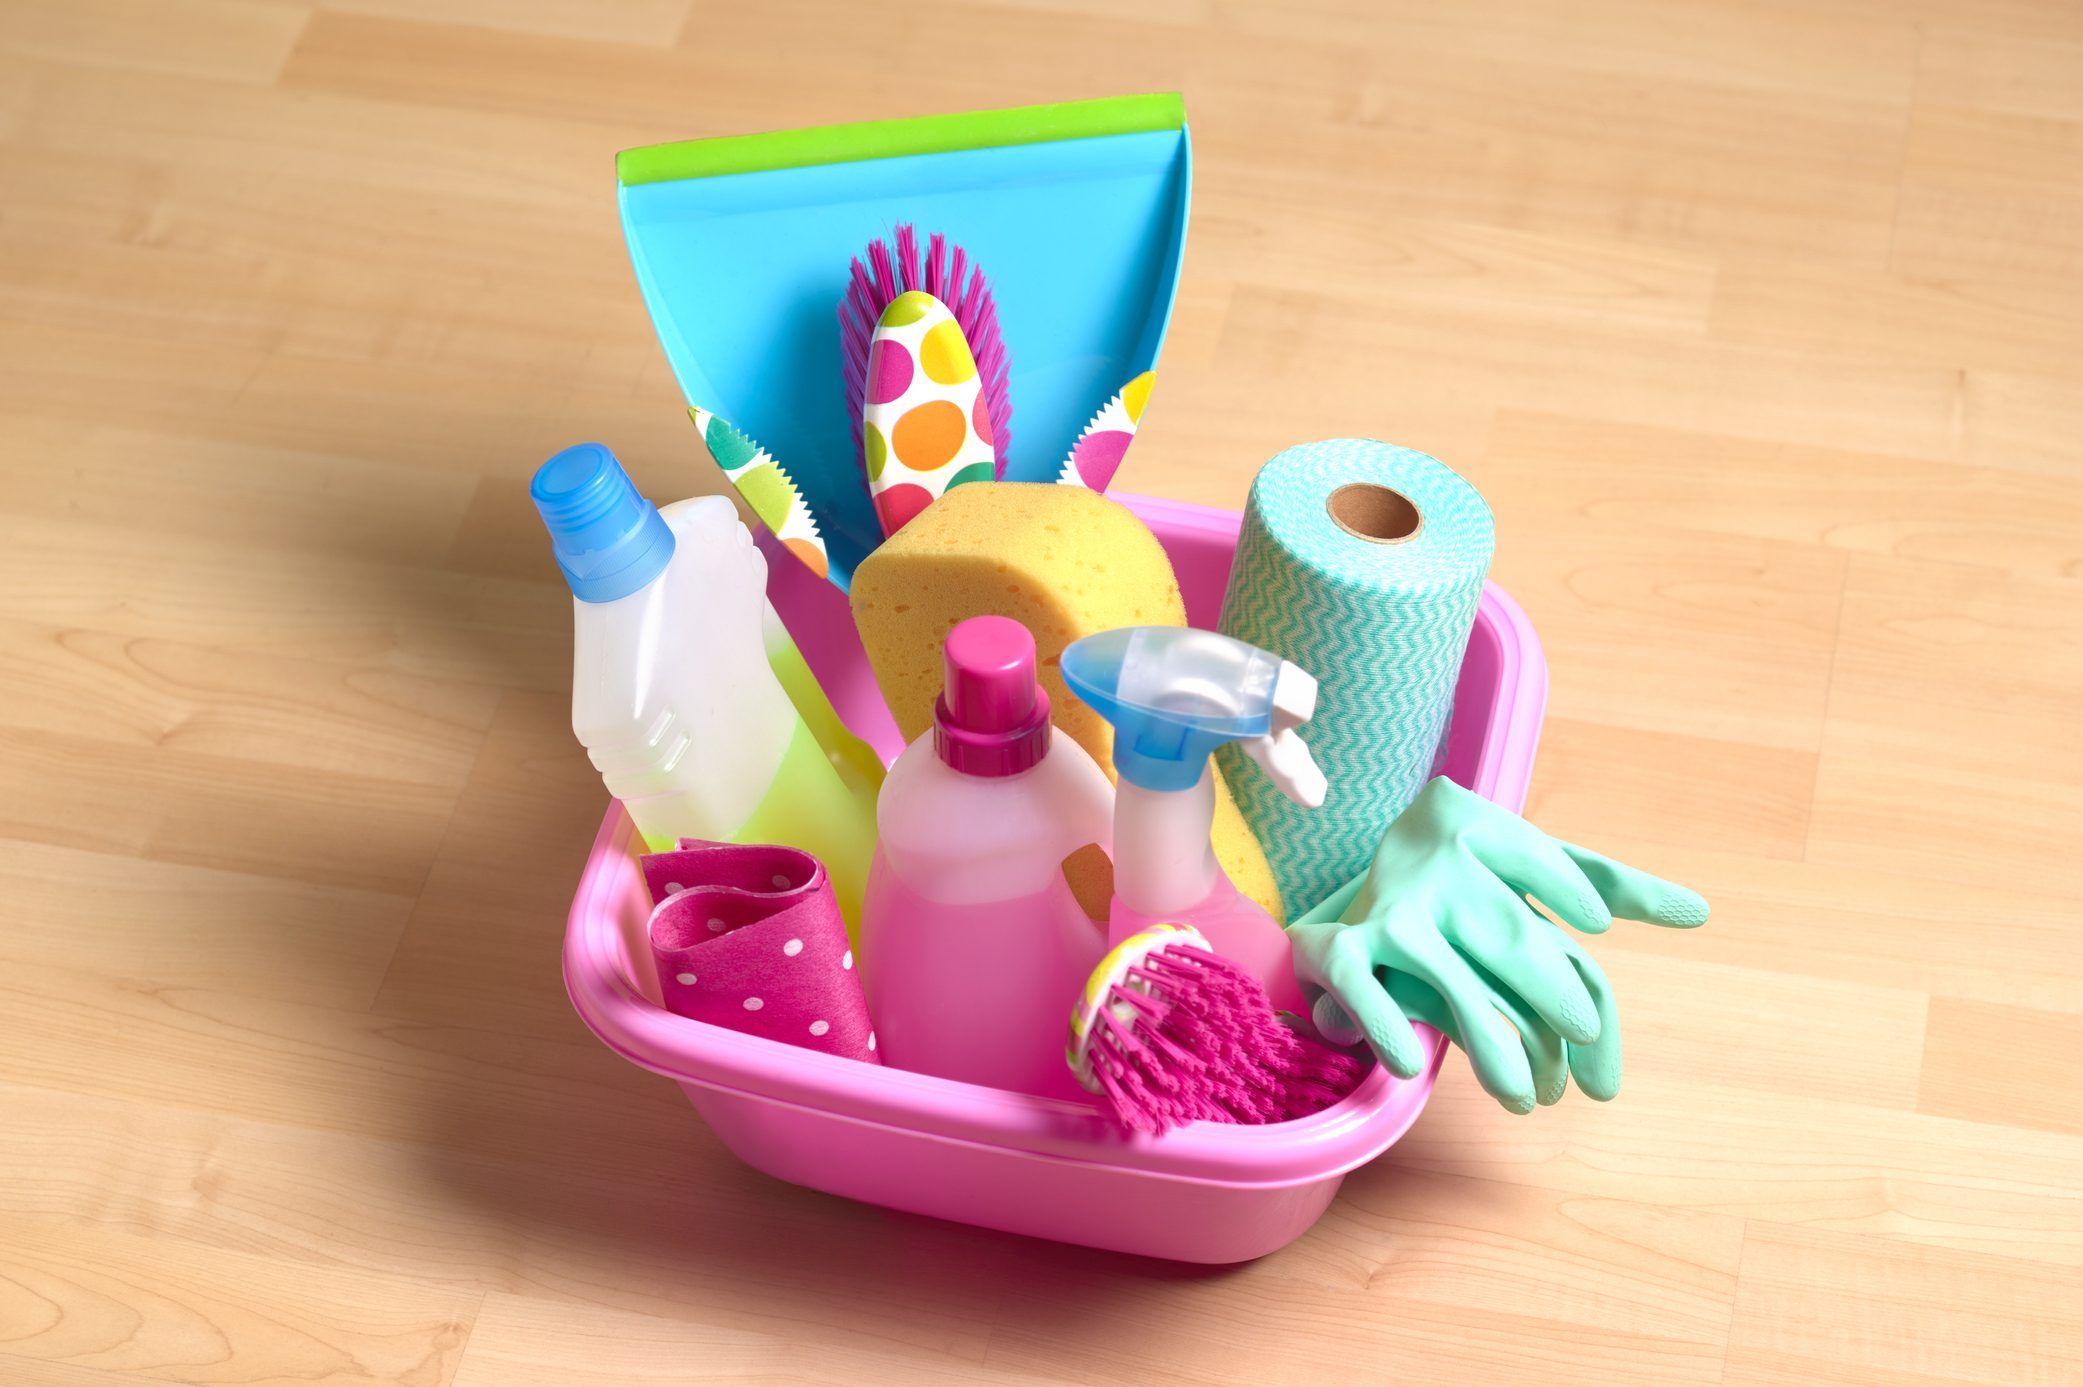 Our Gilded Abode: Organizing Cleaning Supplies